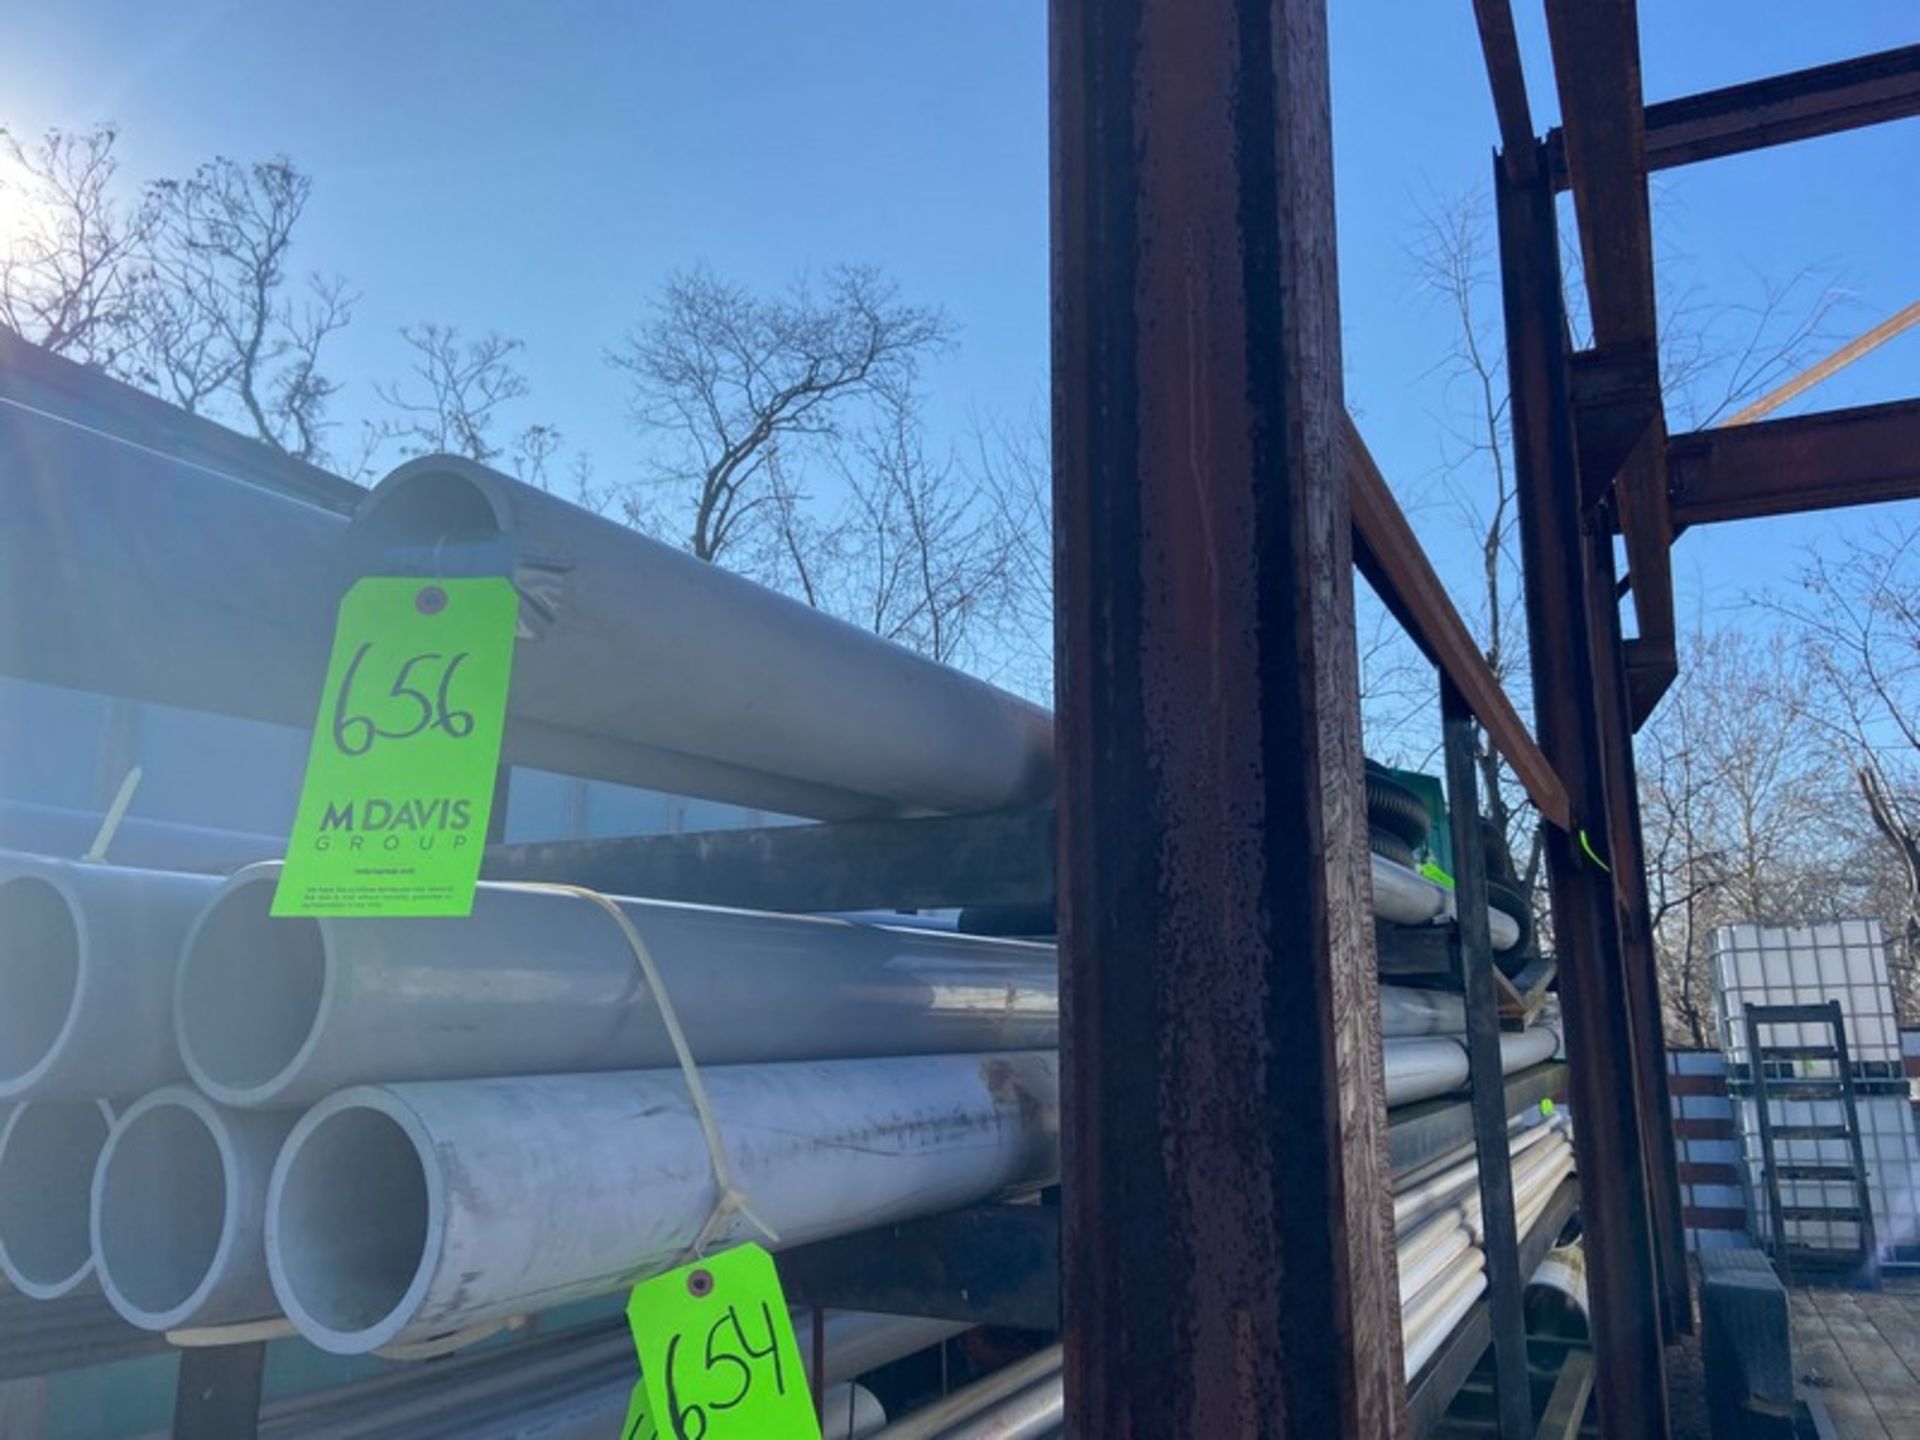 14 ft. Straight Section of PVC Pipe (LOCATED IN MONROEVILLE, PA) (LOADING, RIGGING, & SITE